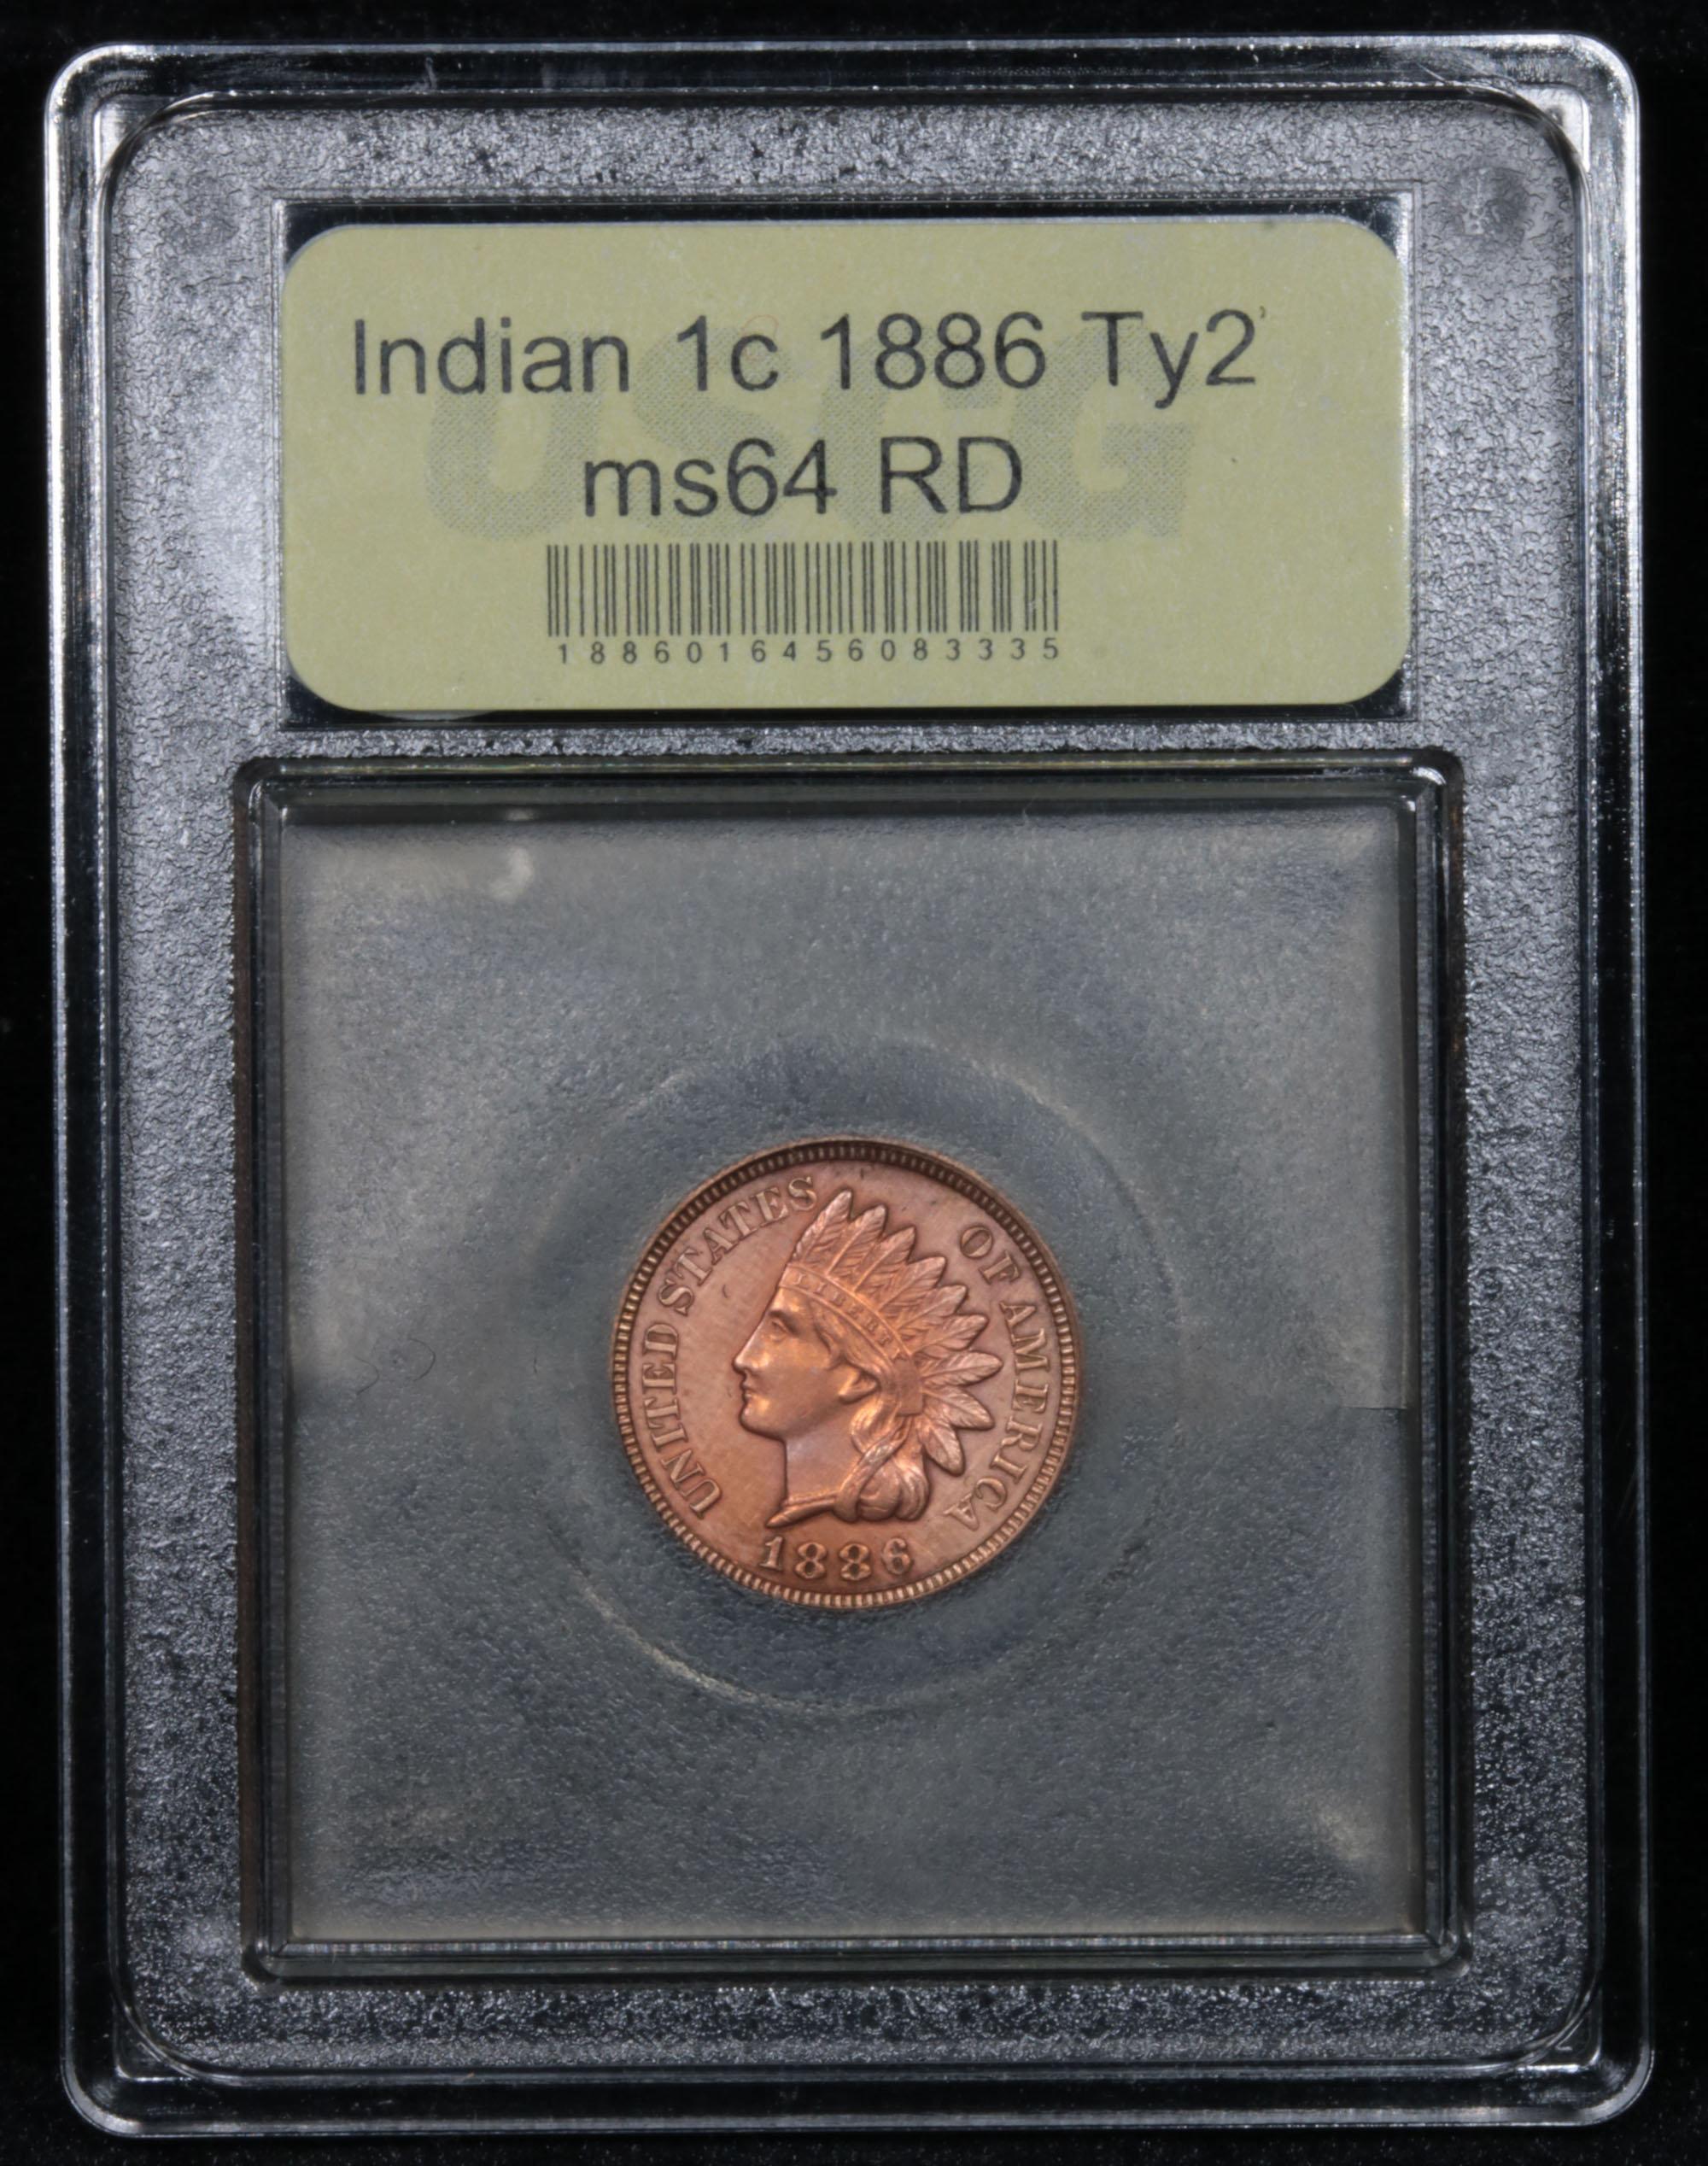 ***Auction Highlight*** 1886 Ty2 Indian Cent 1c Graded Choice Unc RD By USCG (fc)